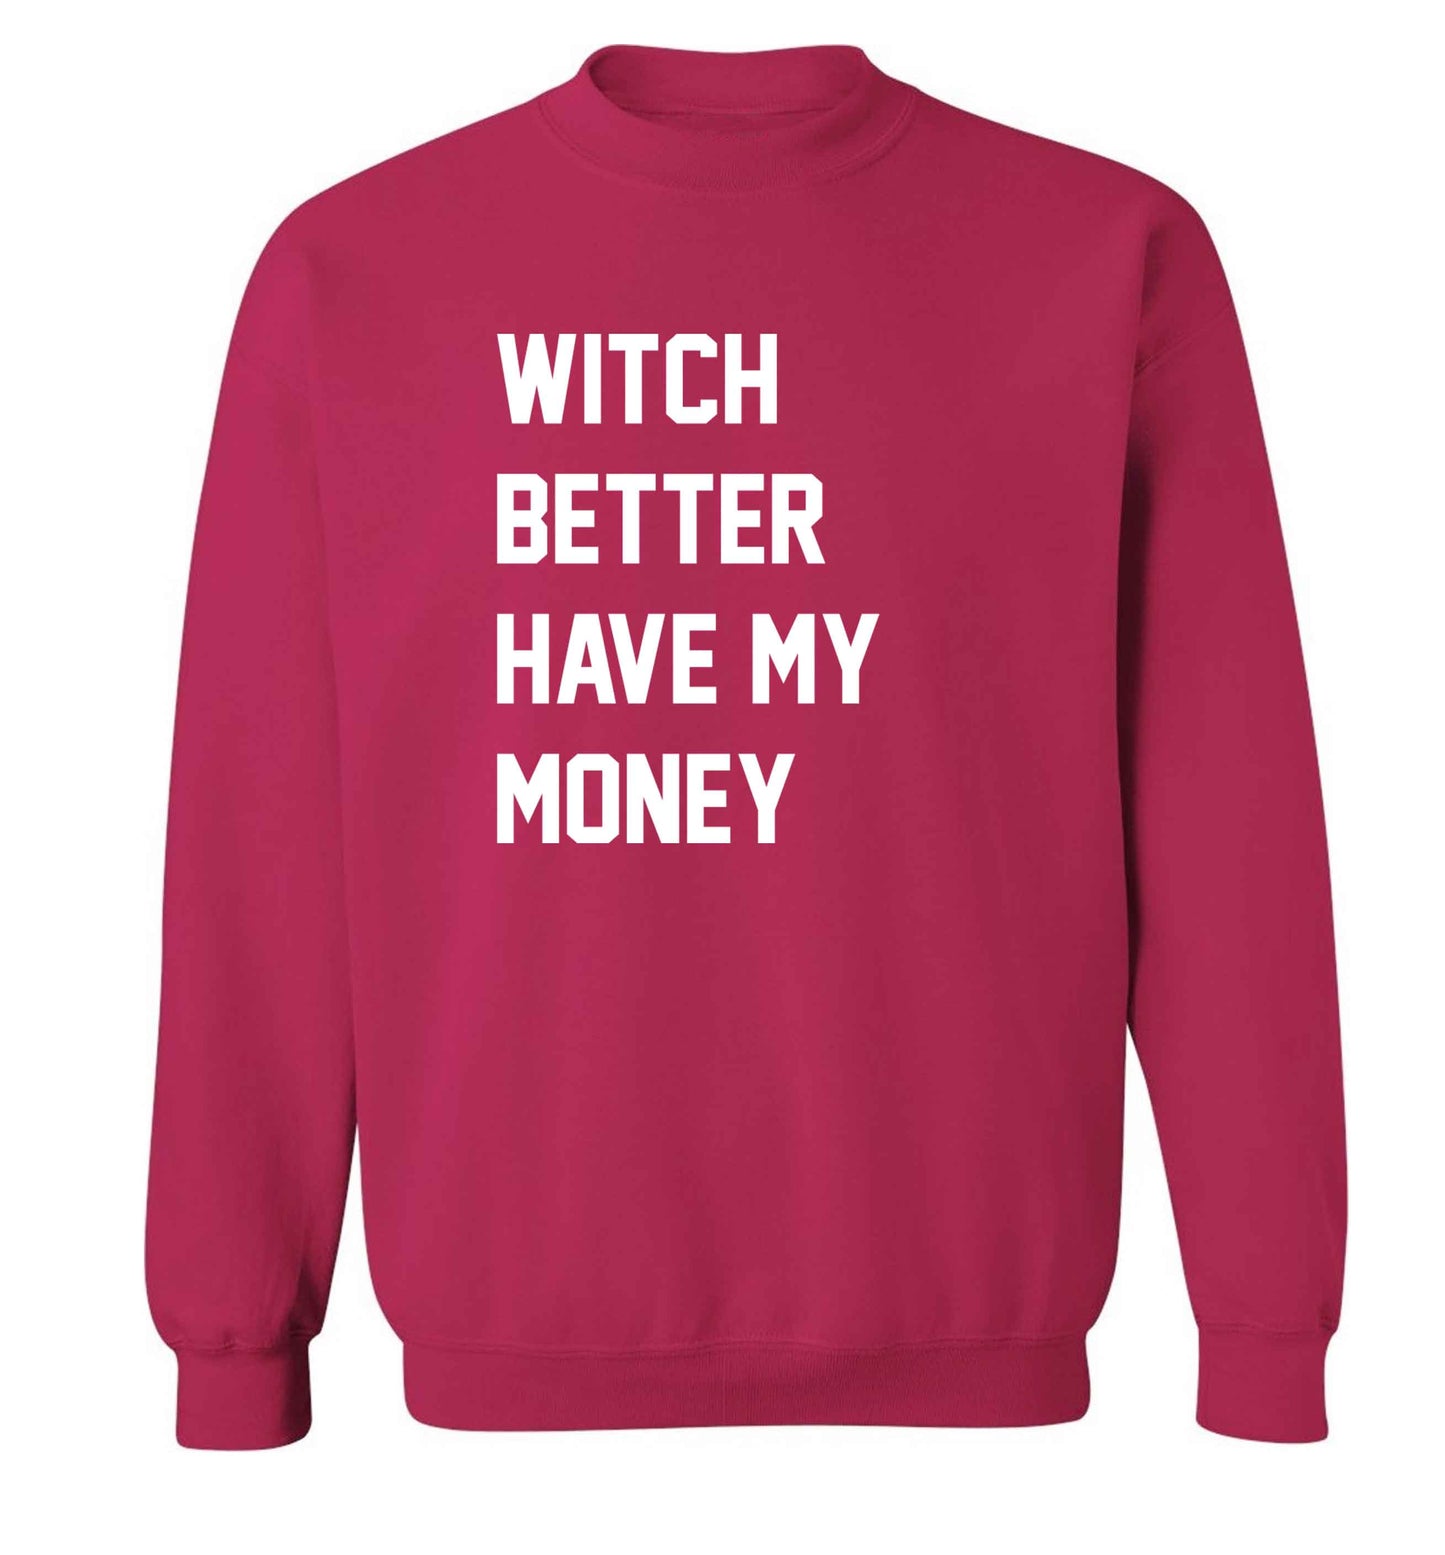 Witch better have my money adult's unisex pink sweater 2XL